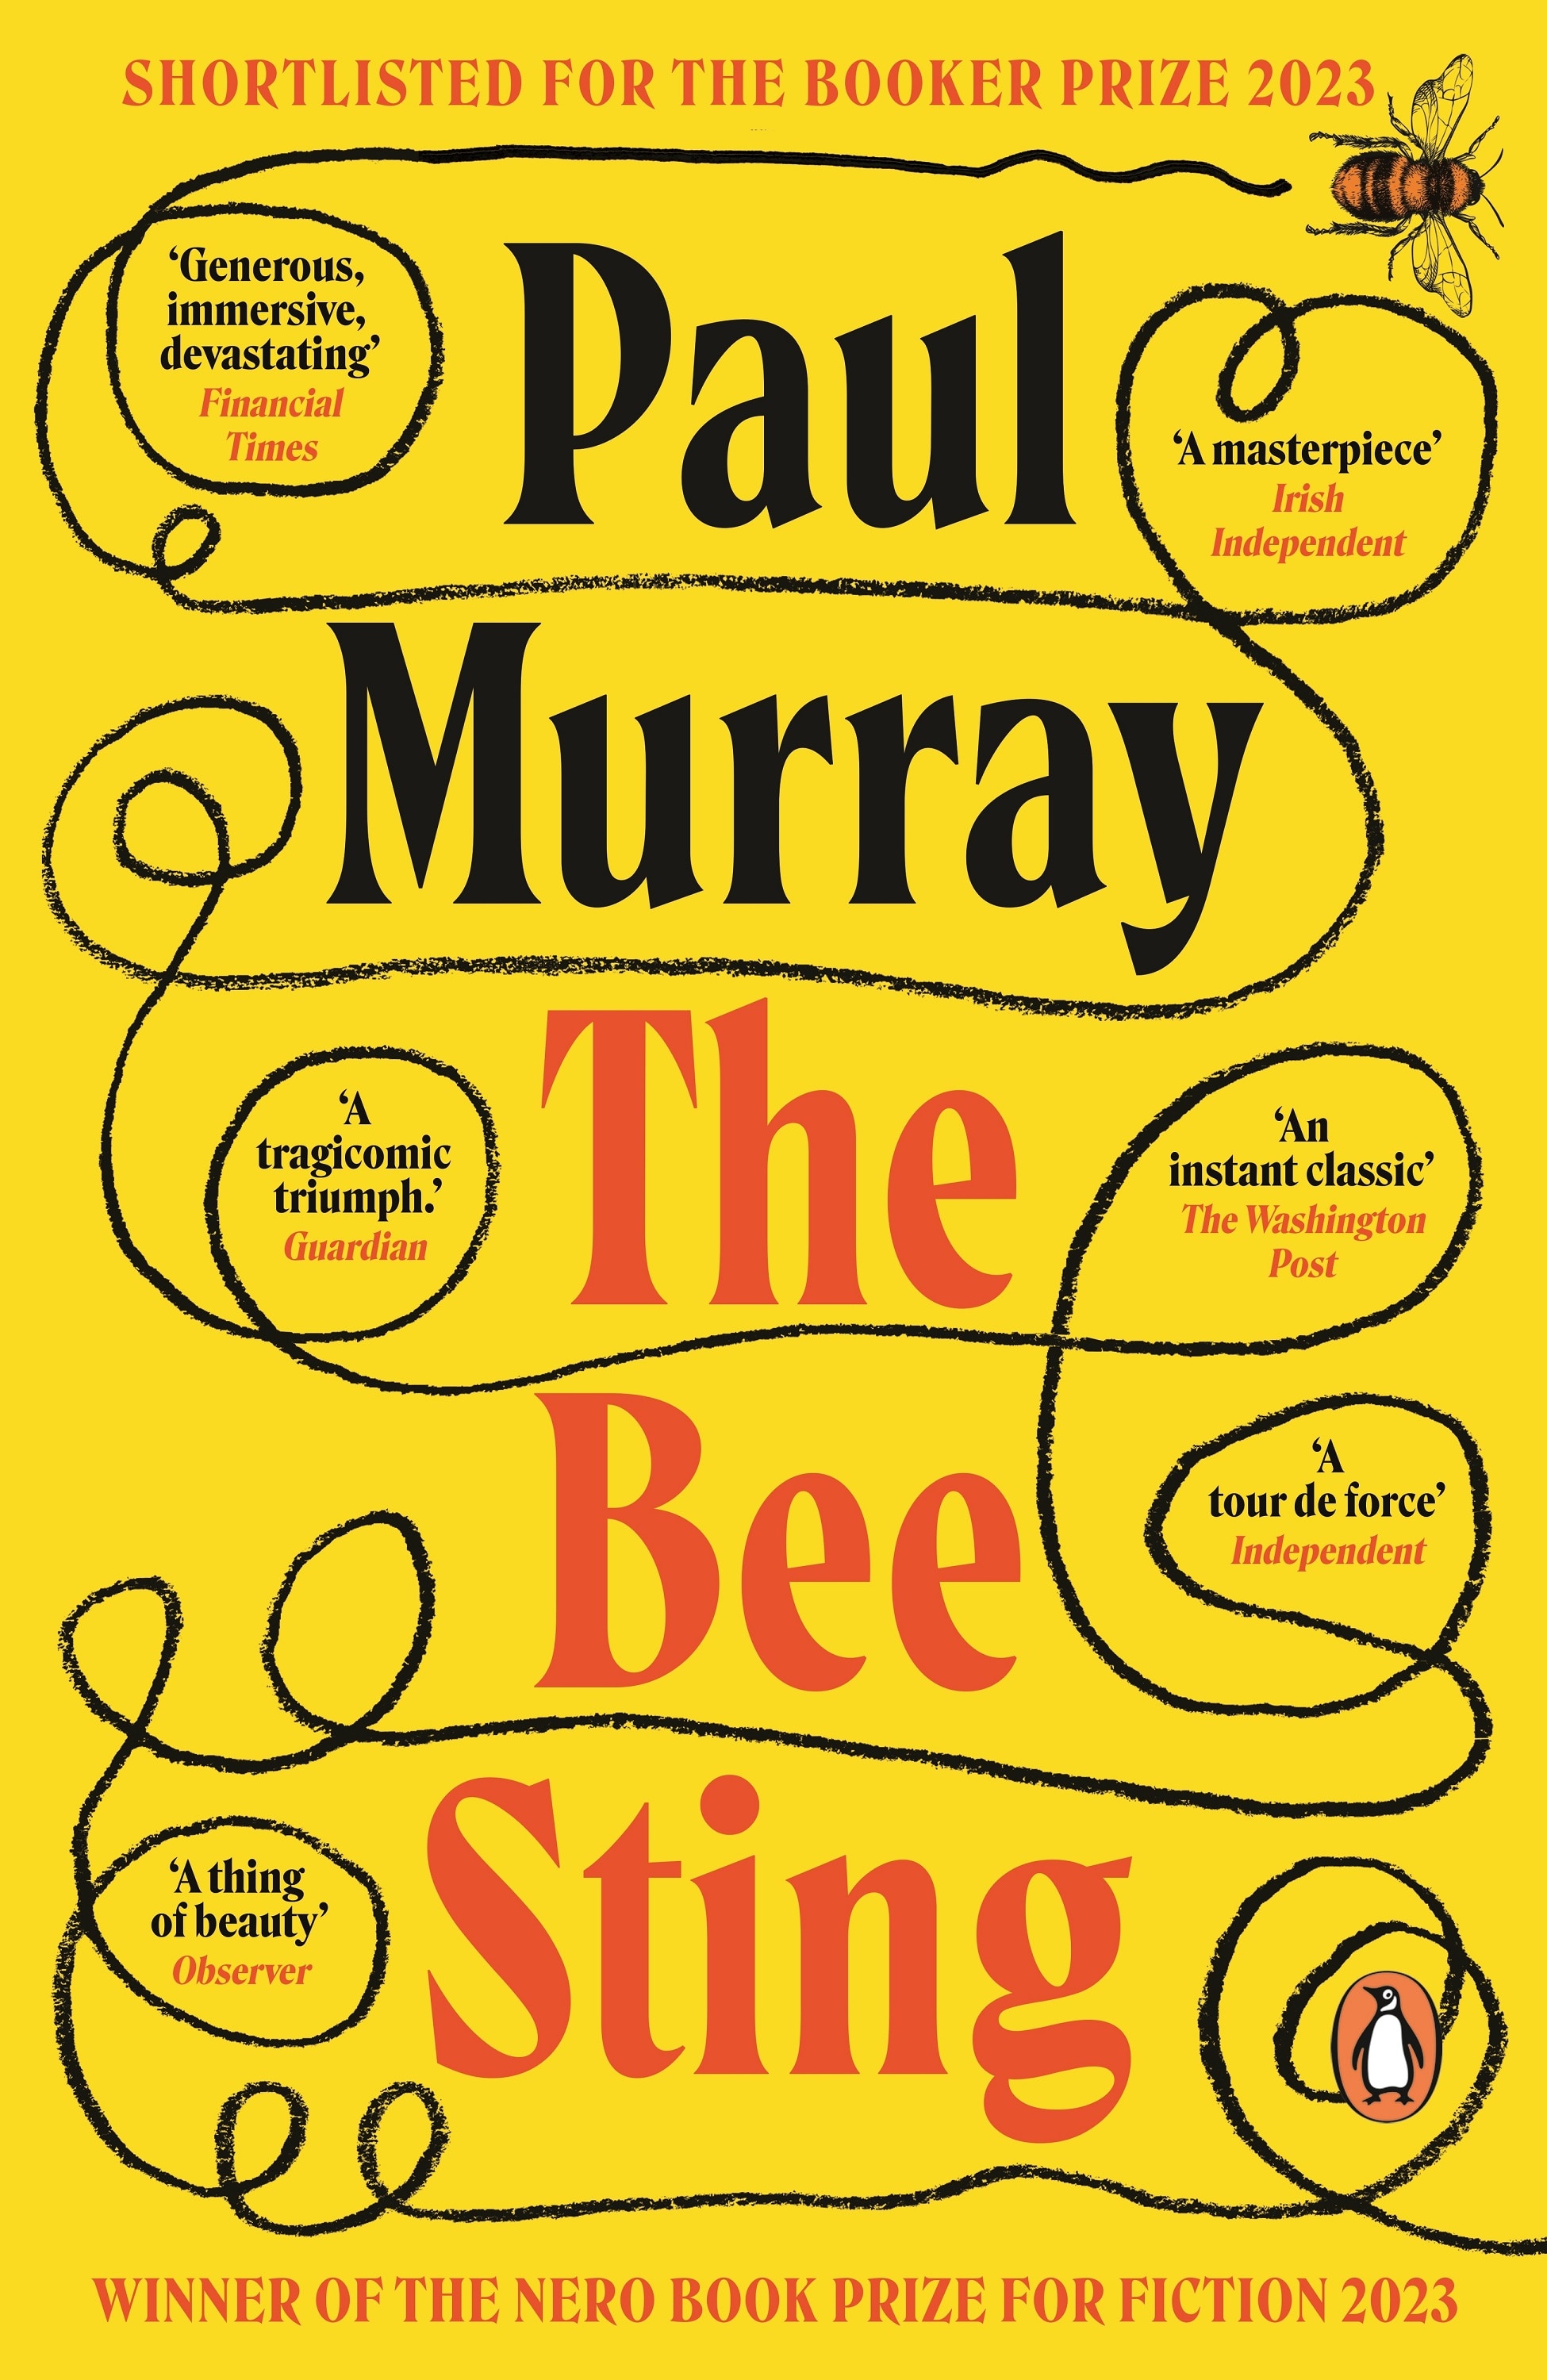 A book cover with a yellow background and red and black text; and a black squiggly line denoting the path of a flying bee